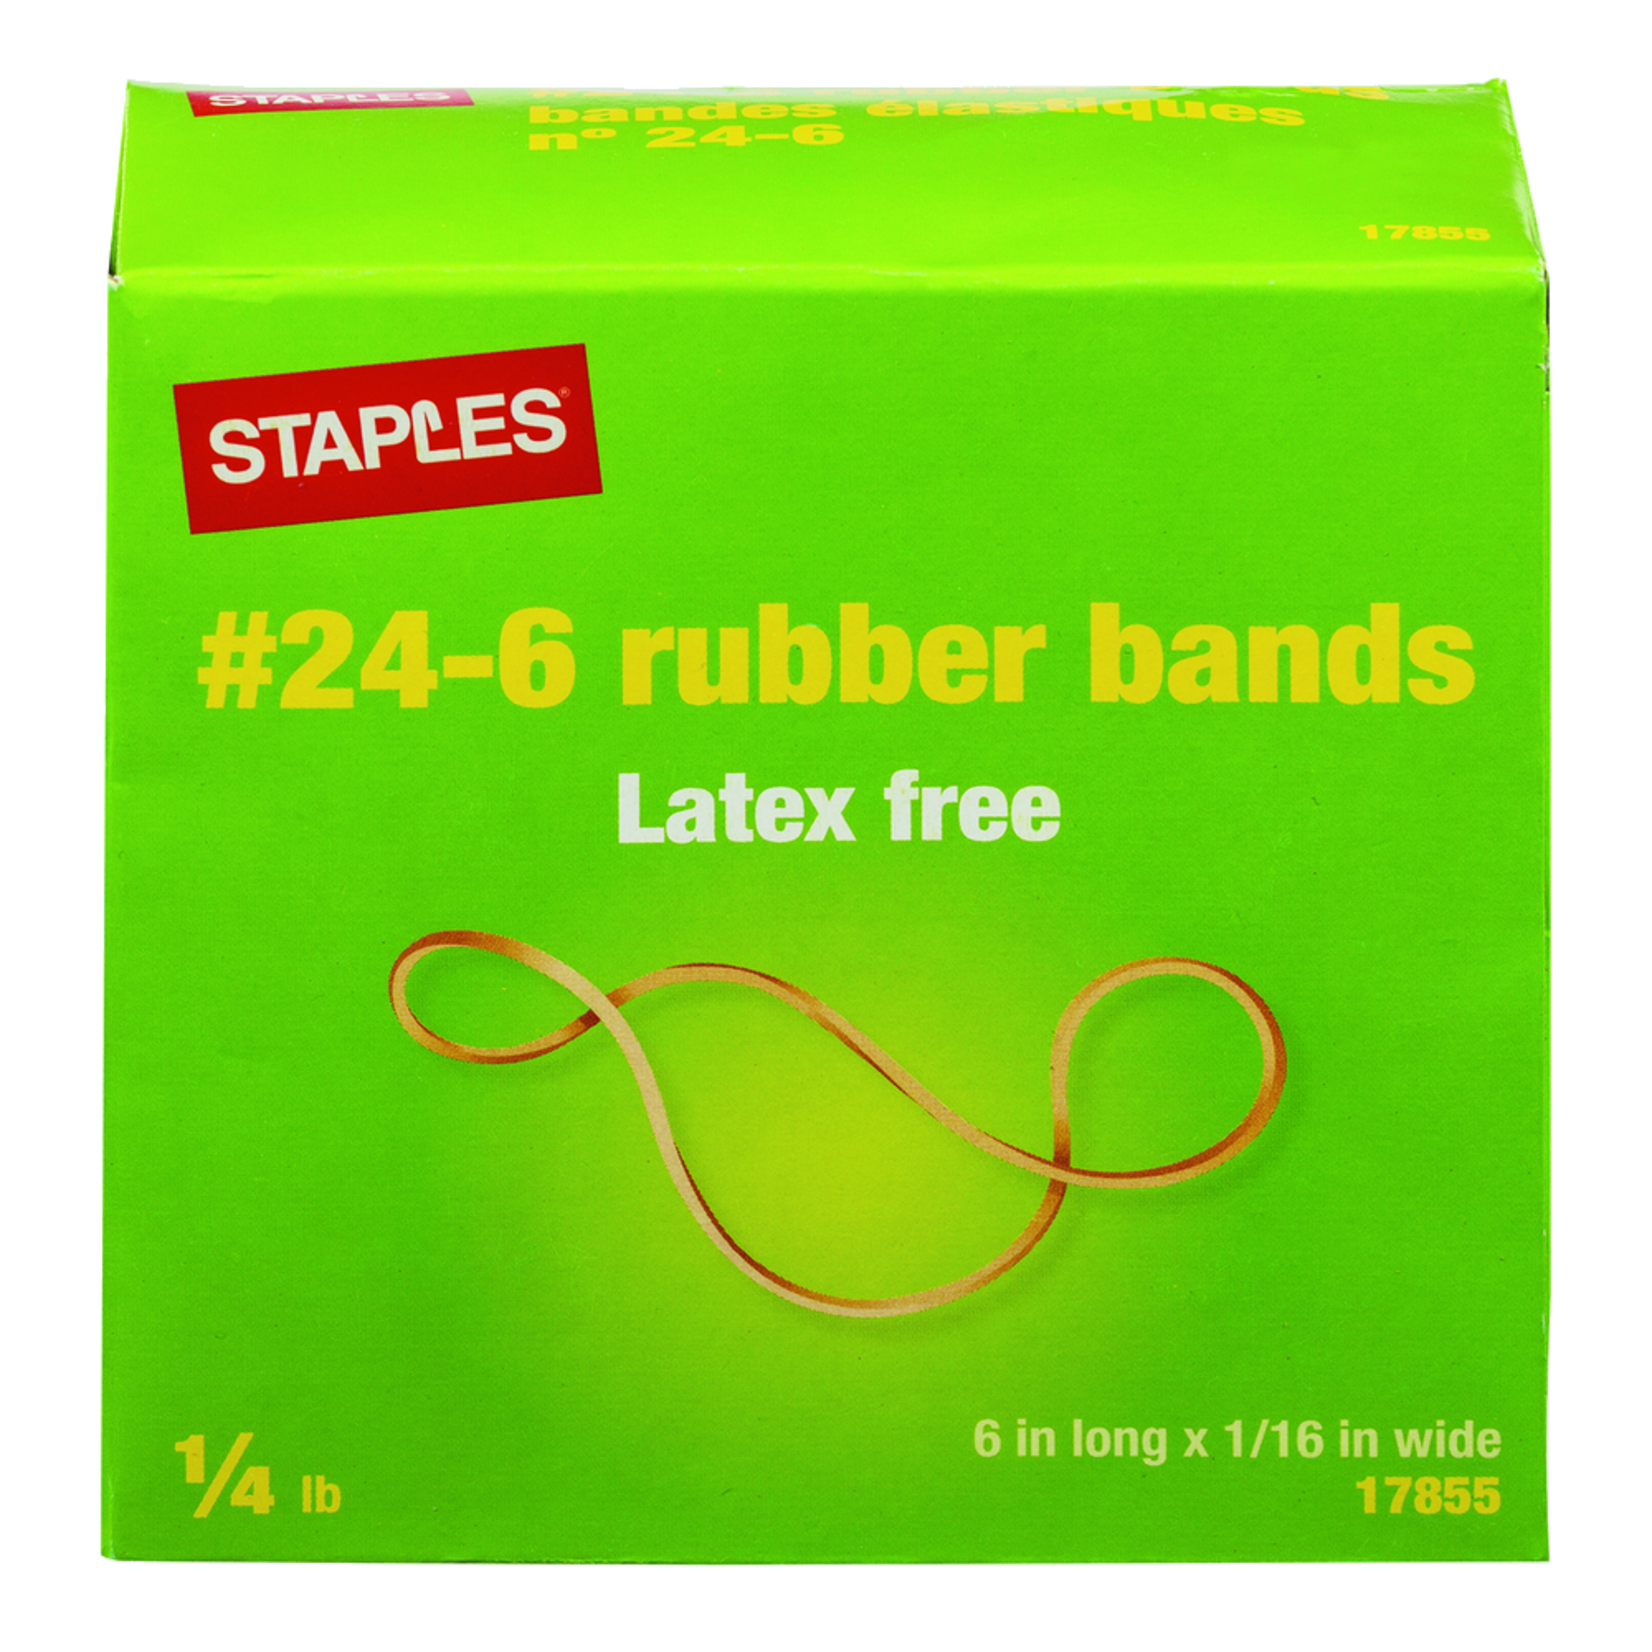 Staples Latex Free Rubber Bands - #24-6, 1/4 lb. Box